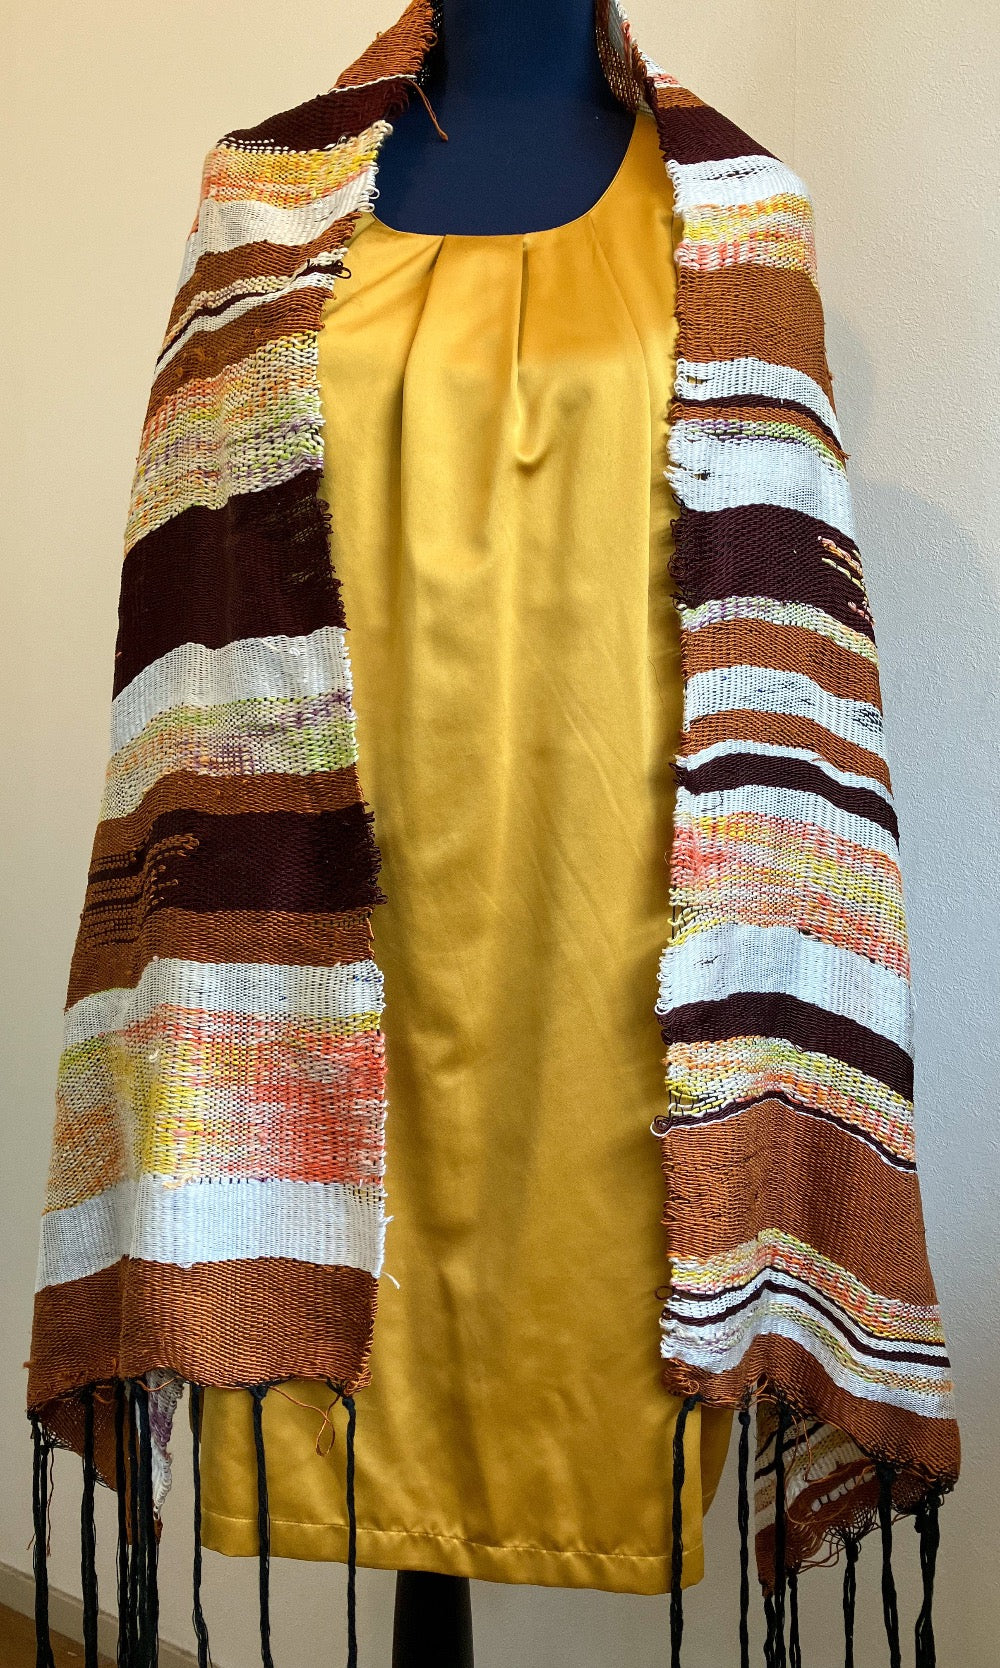 Female mannequin in gold dress wearing brown and cream silk shawl draped over shoulders